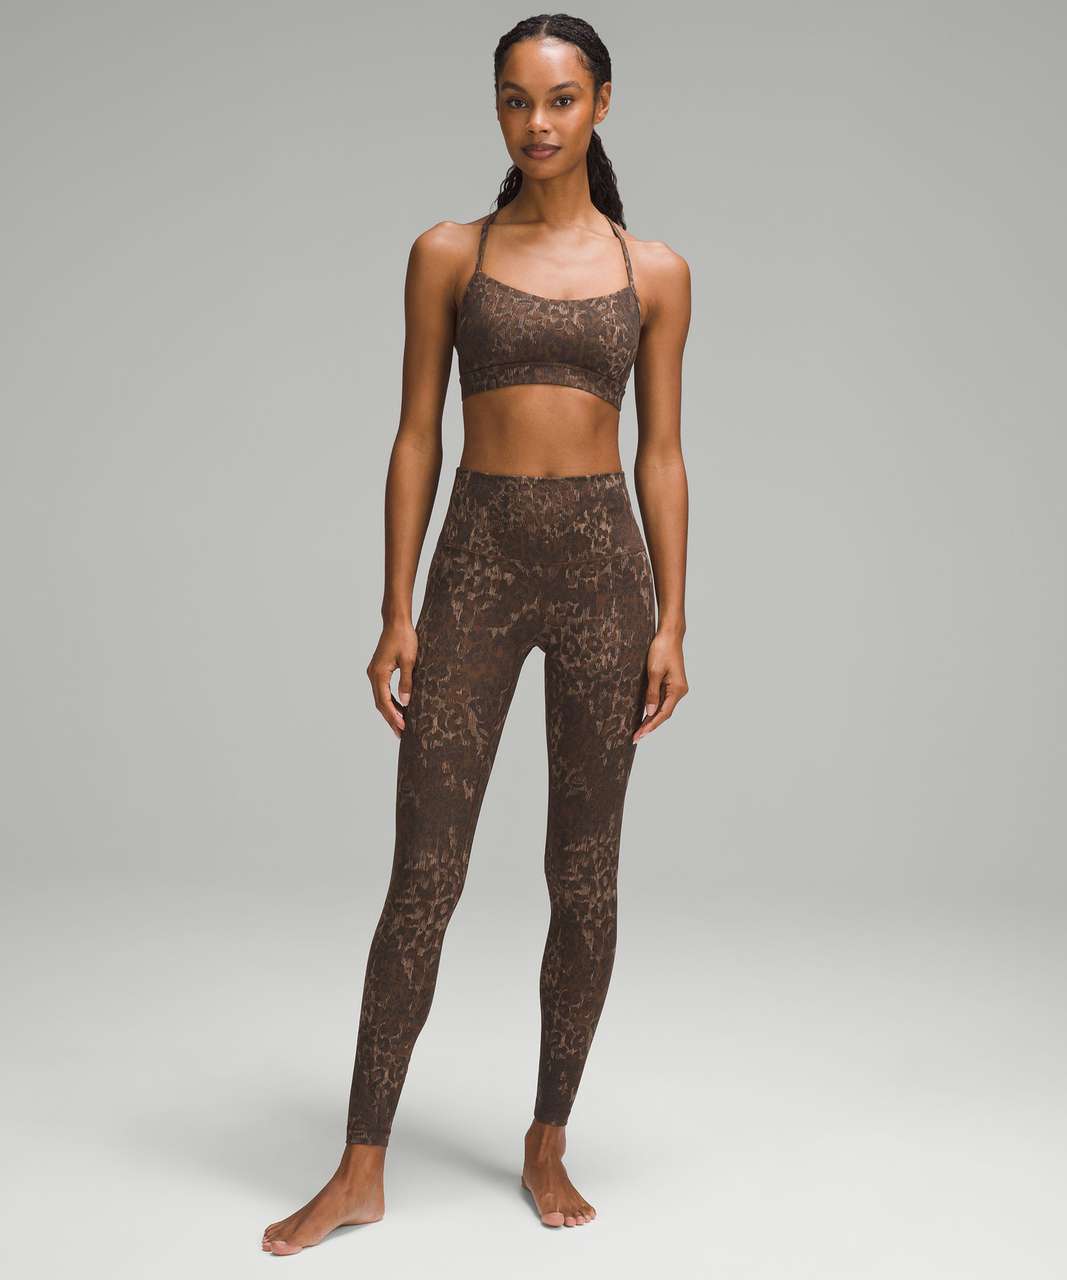 Lululemon Align High-Rise Pant 28" - Lined Truleopard MAX Brown Multi